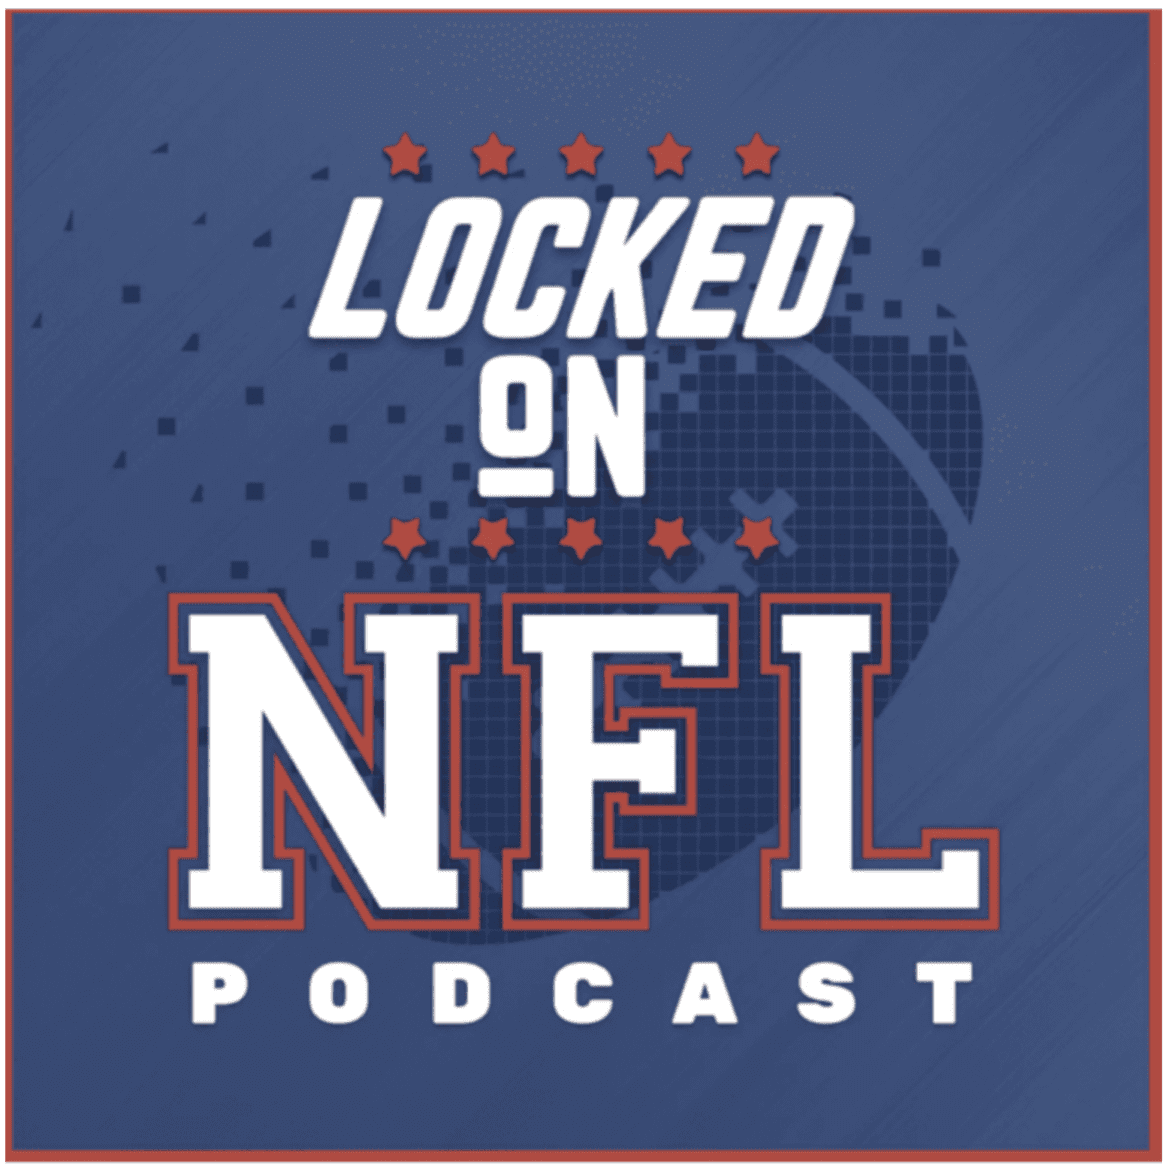 Black Podcasting - NFL Trades, Preseason Games and Injury Scares